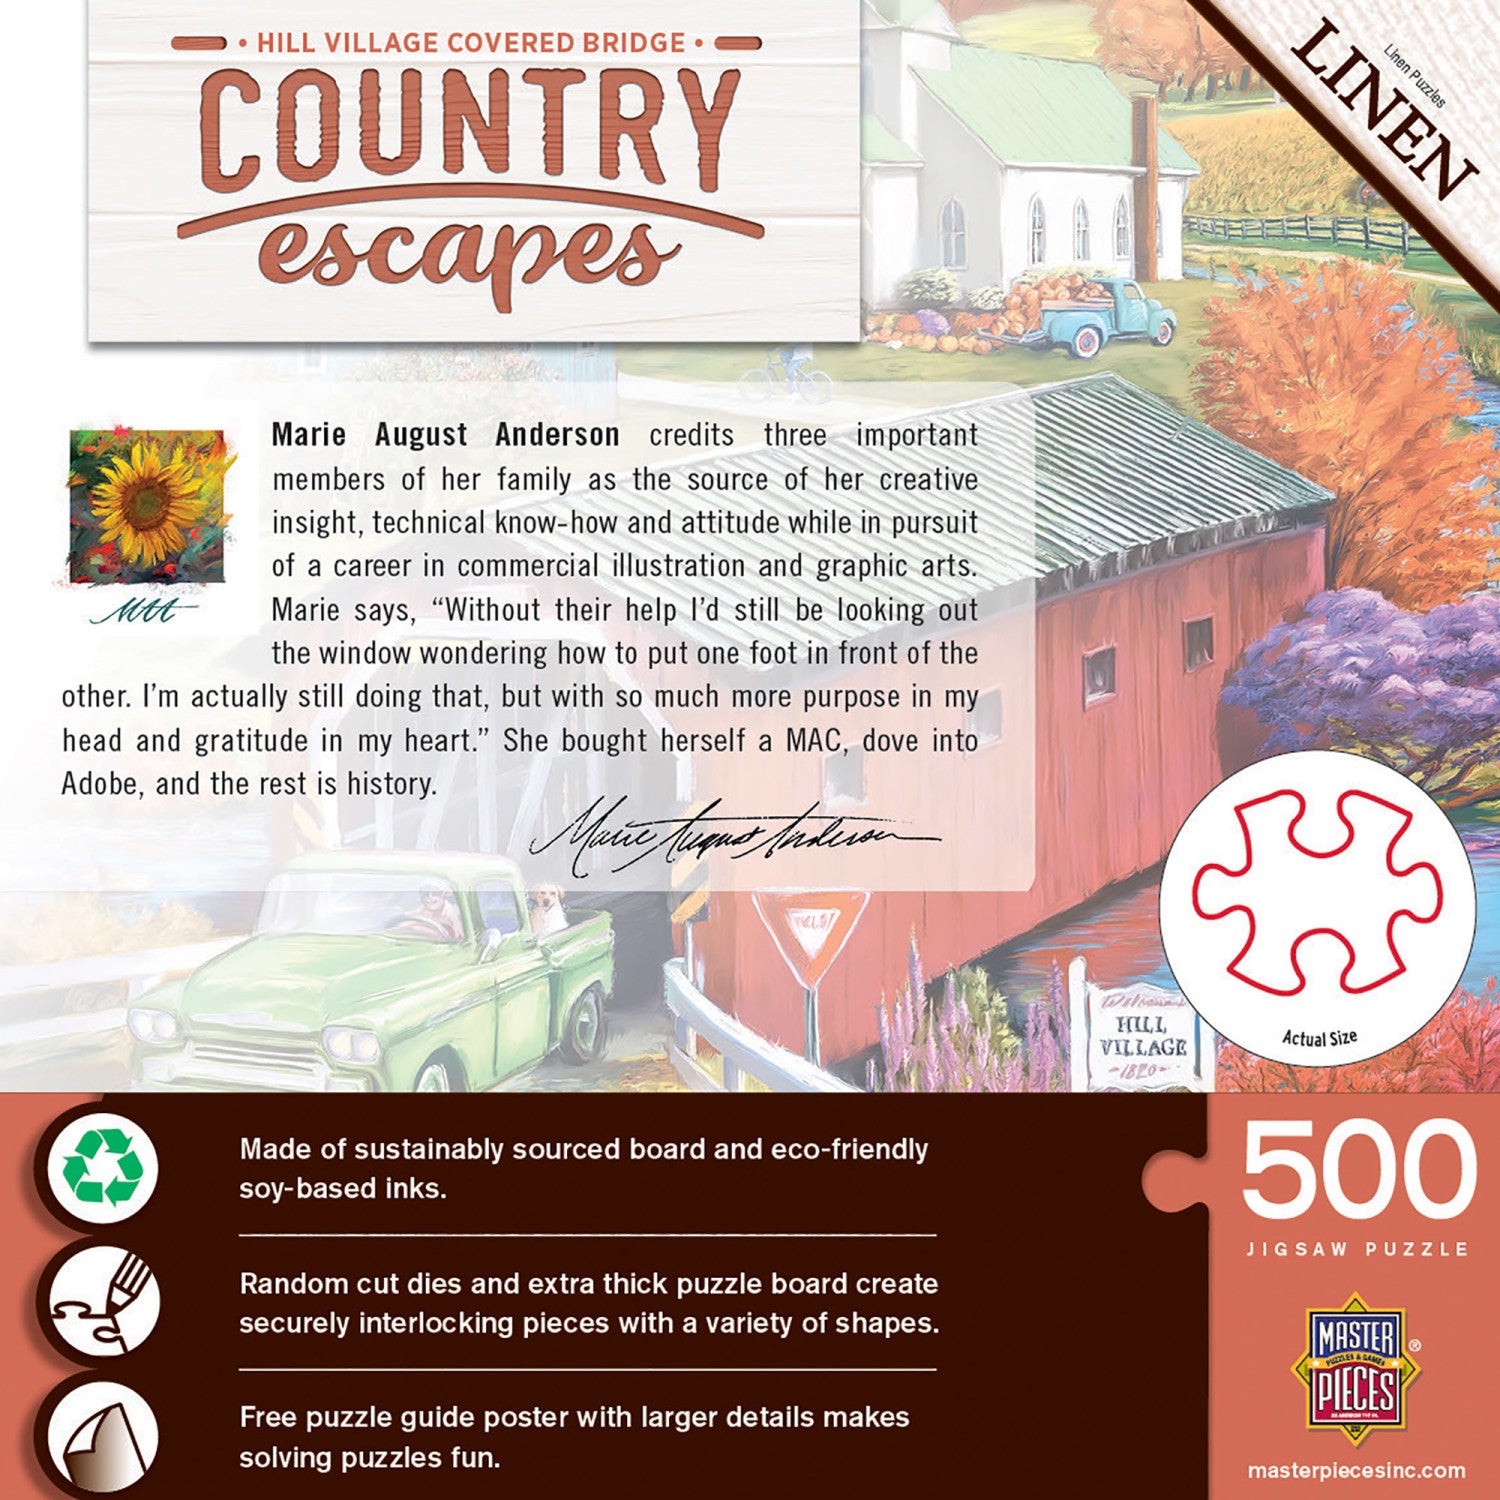 Country Escapes - Hill Village Covered Bridge 500 Piece Jigsaw Puzzle